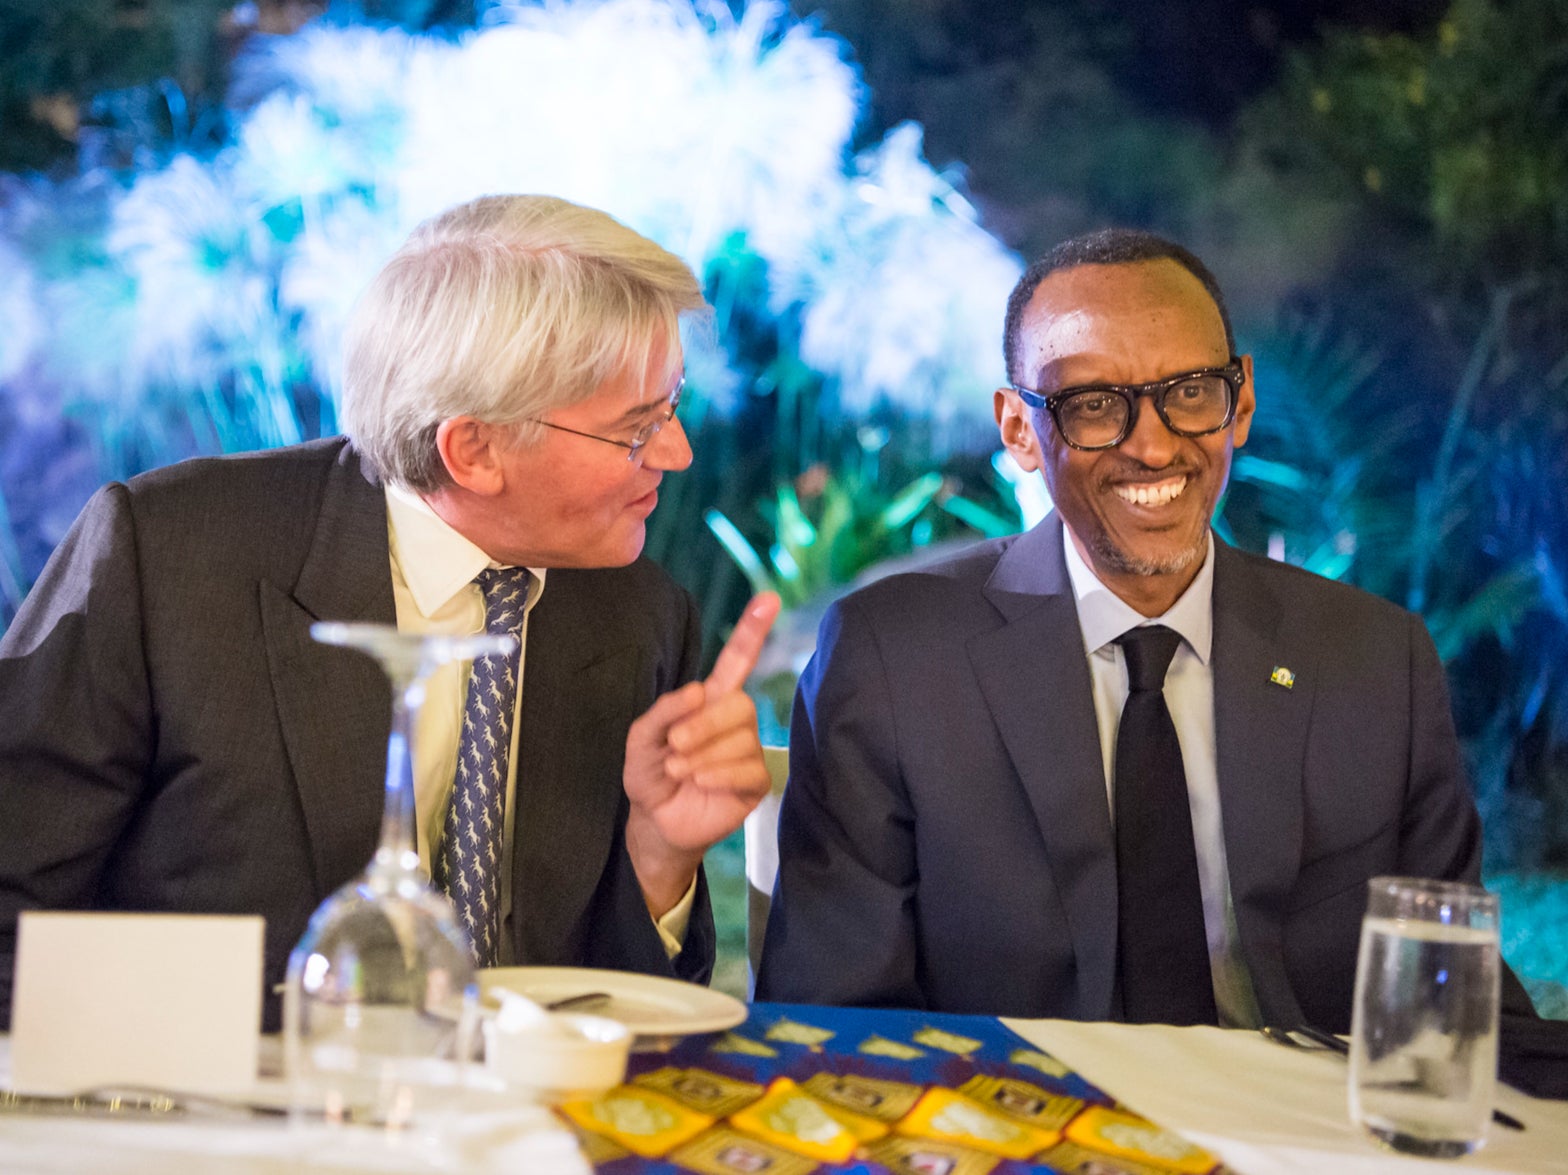 Rwandan president Paul Kagame with Conservative MP Andrew Mitchell during a celebration for the 10th anniversary of Project Umubano, in Kigali, in August 2017